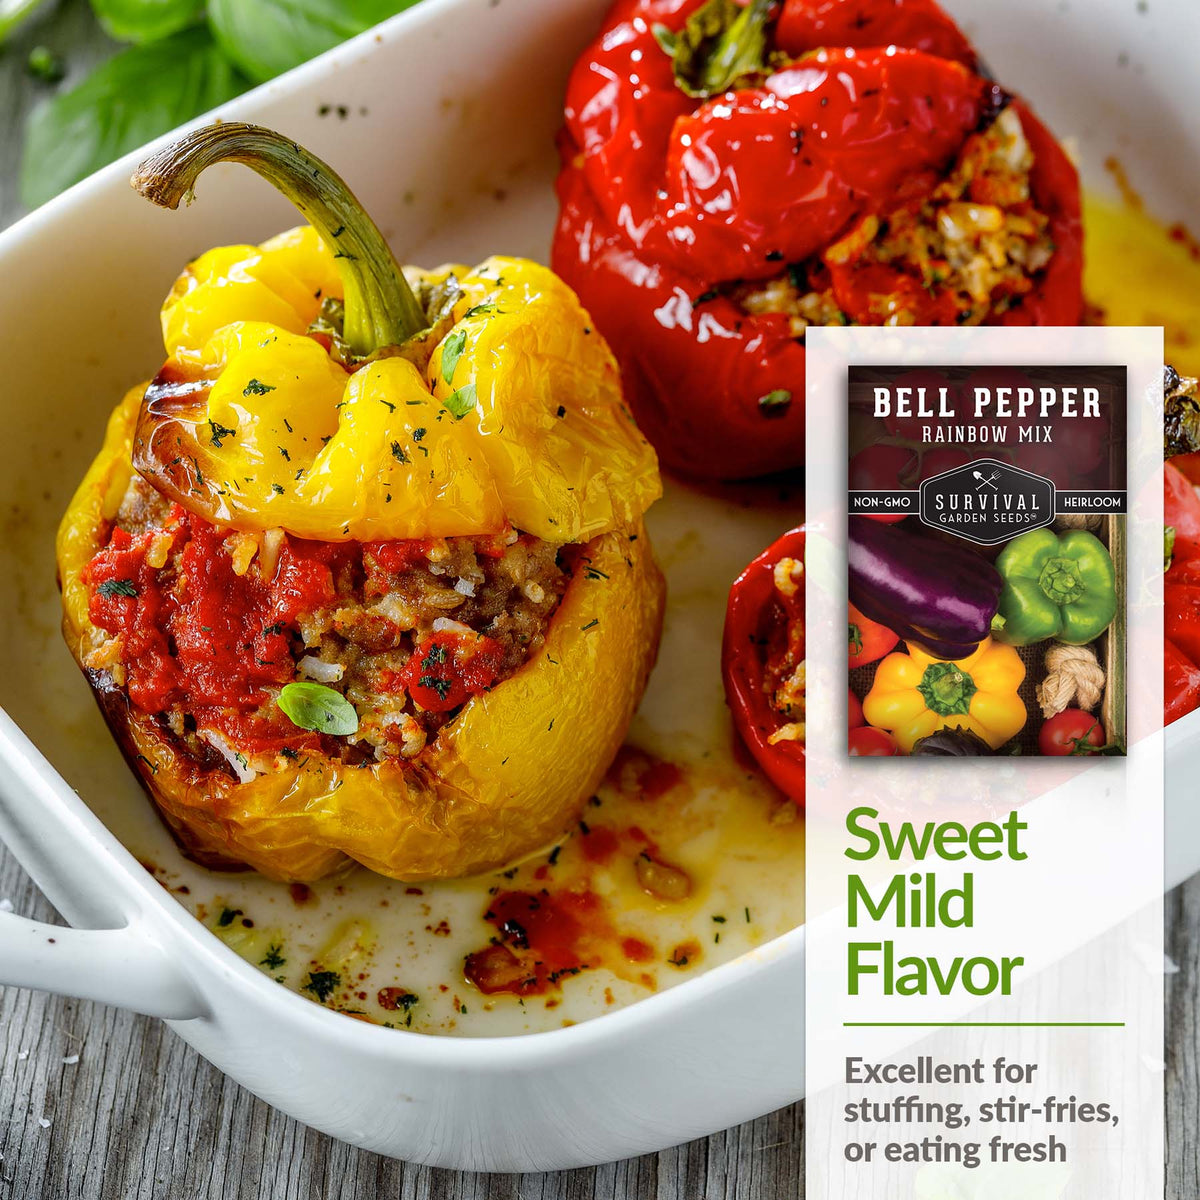 Bell peppers with a sweet mild flavor